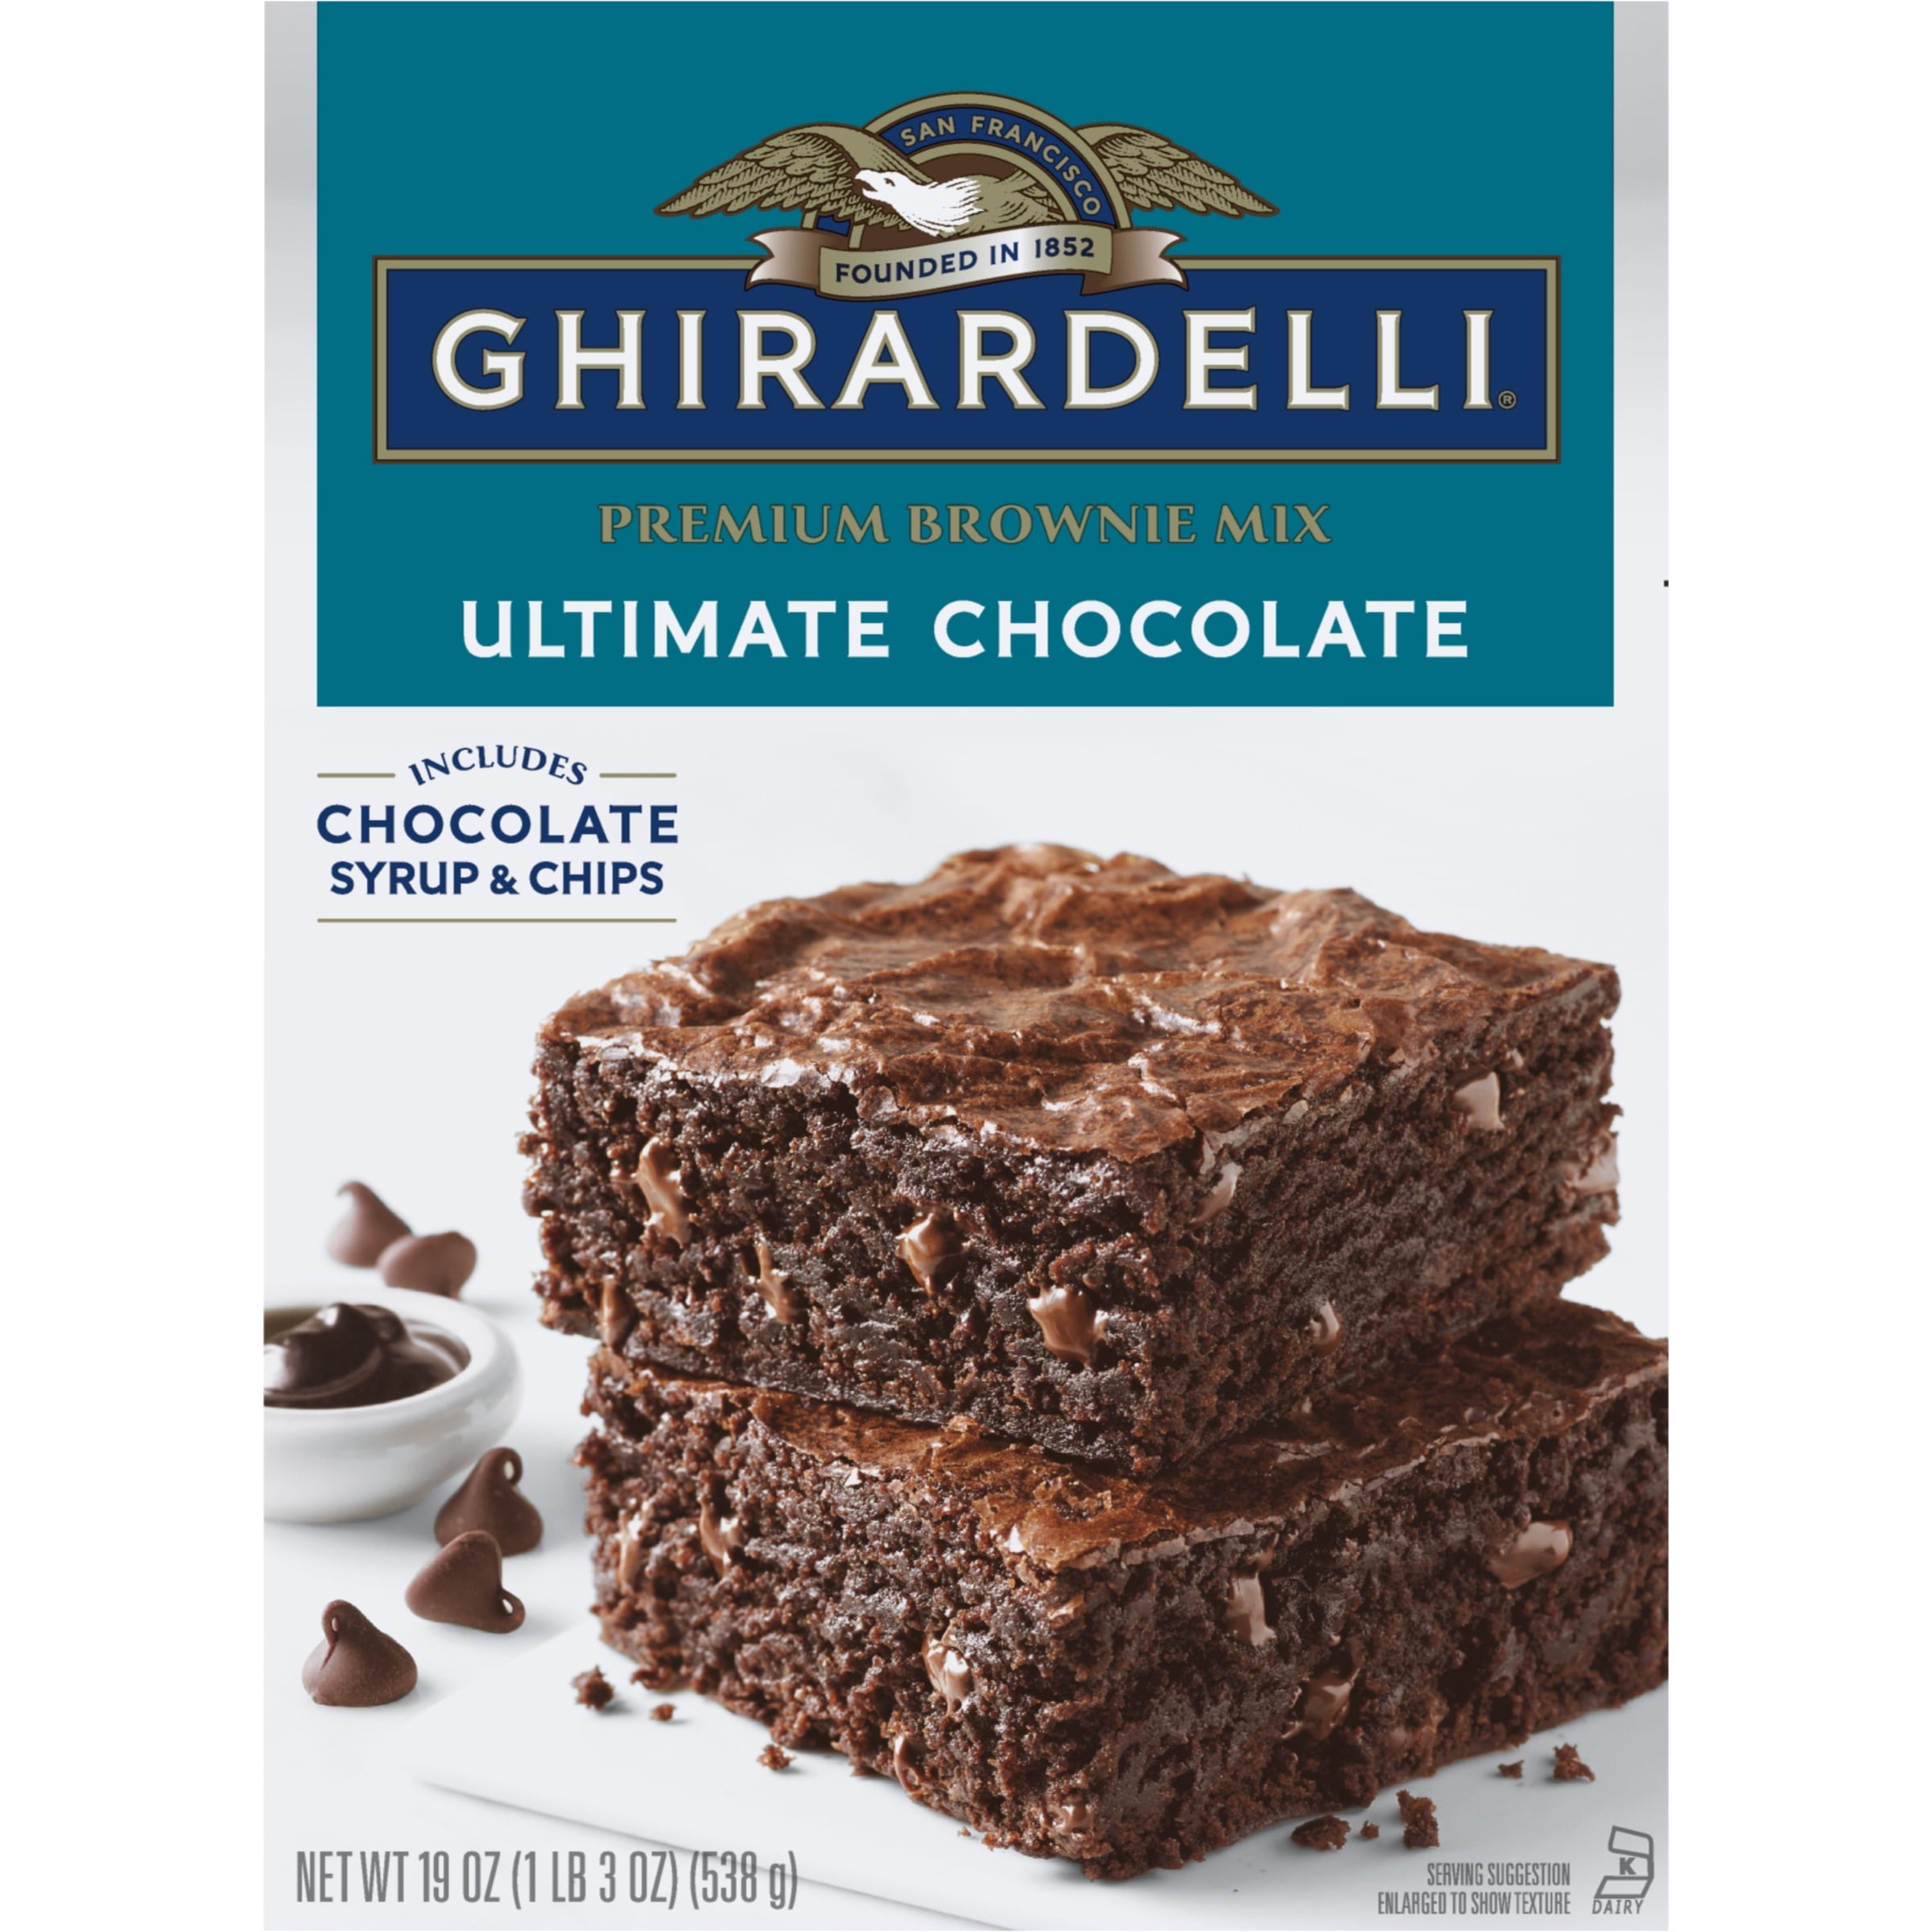 Ghirardelli Ultimate Chocolate Premium Brownie Mix, Includes Chocolate Syrup and Chips, 19 oz Box